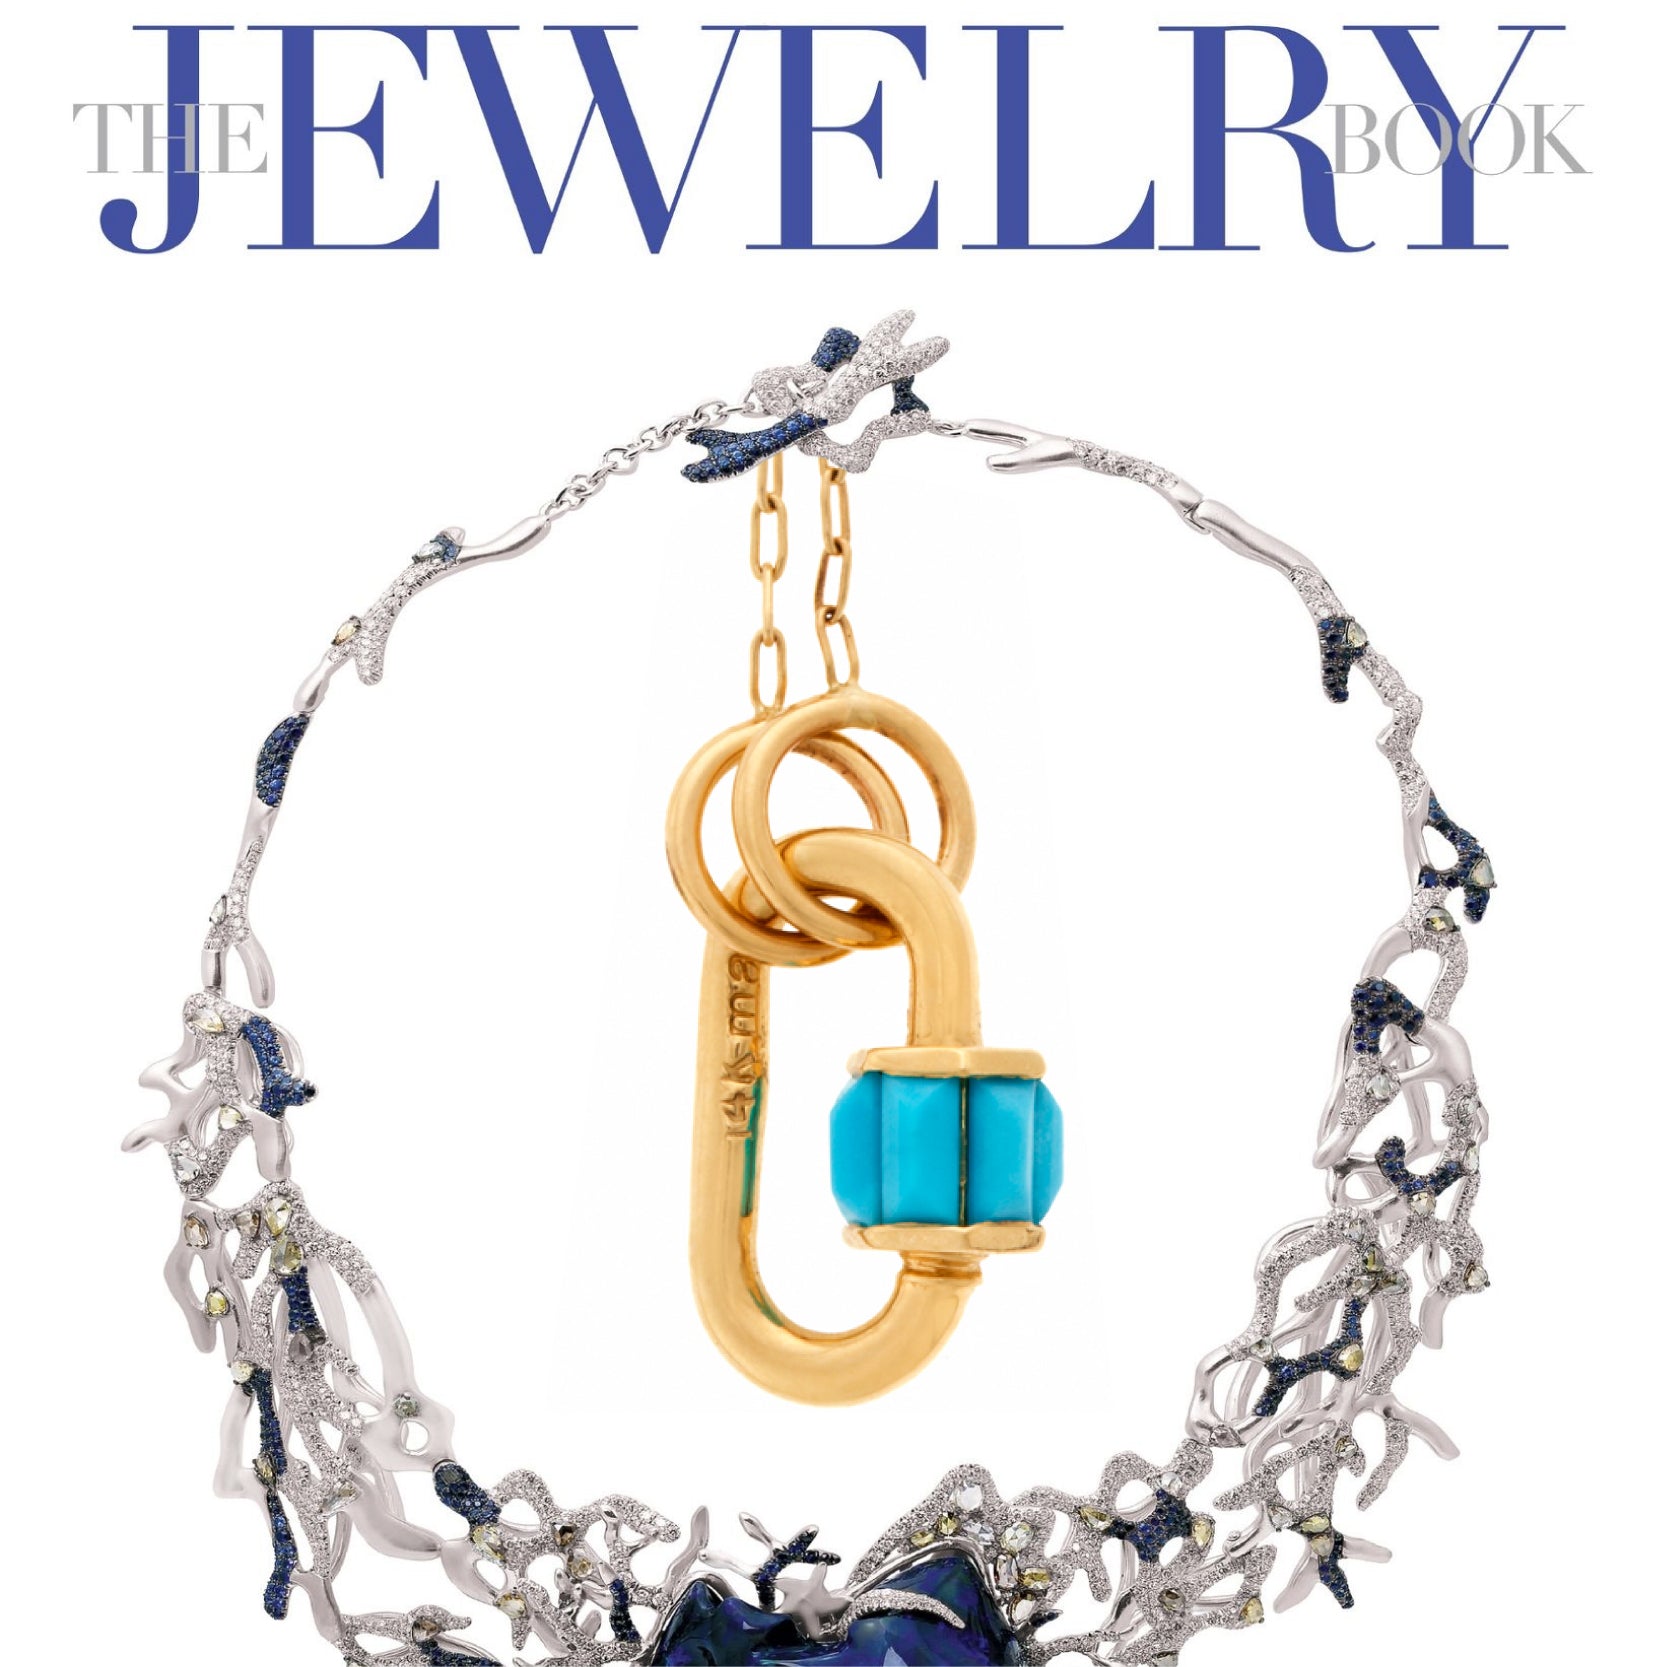 The Jewelry Book, Spring 2016